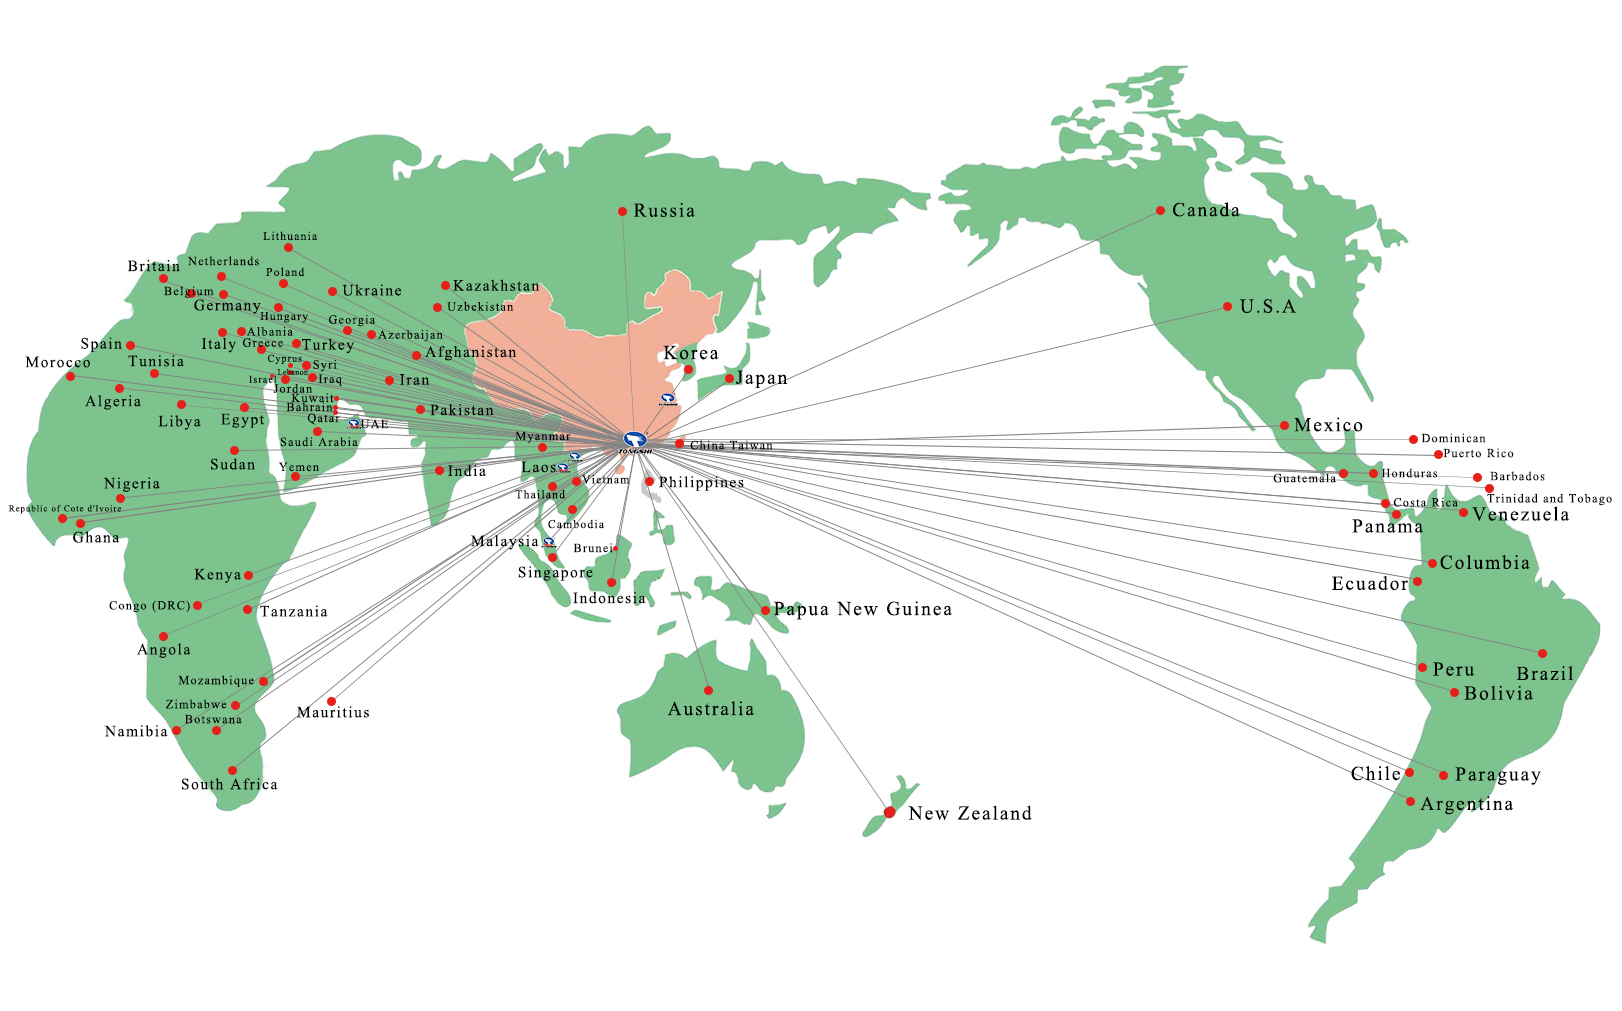 XTS products are exported to more than 90 countries around the world